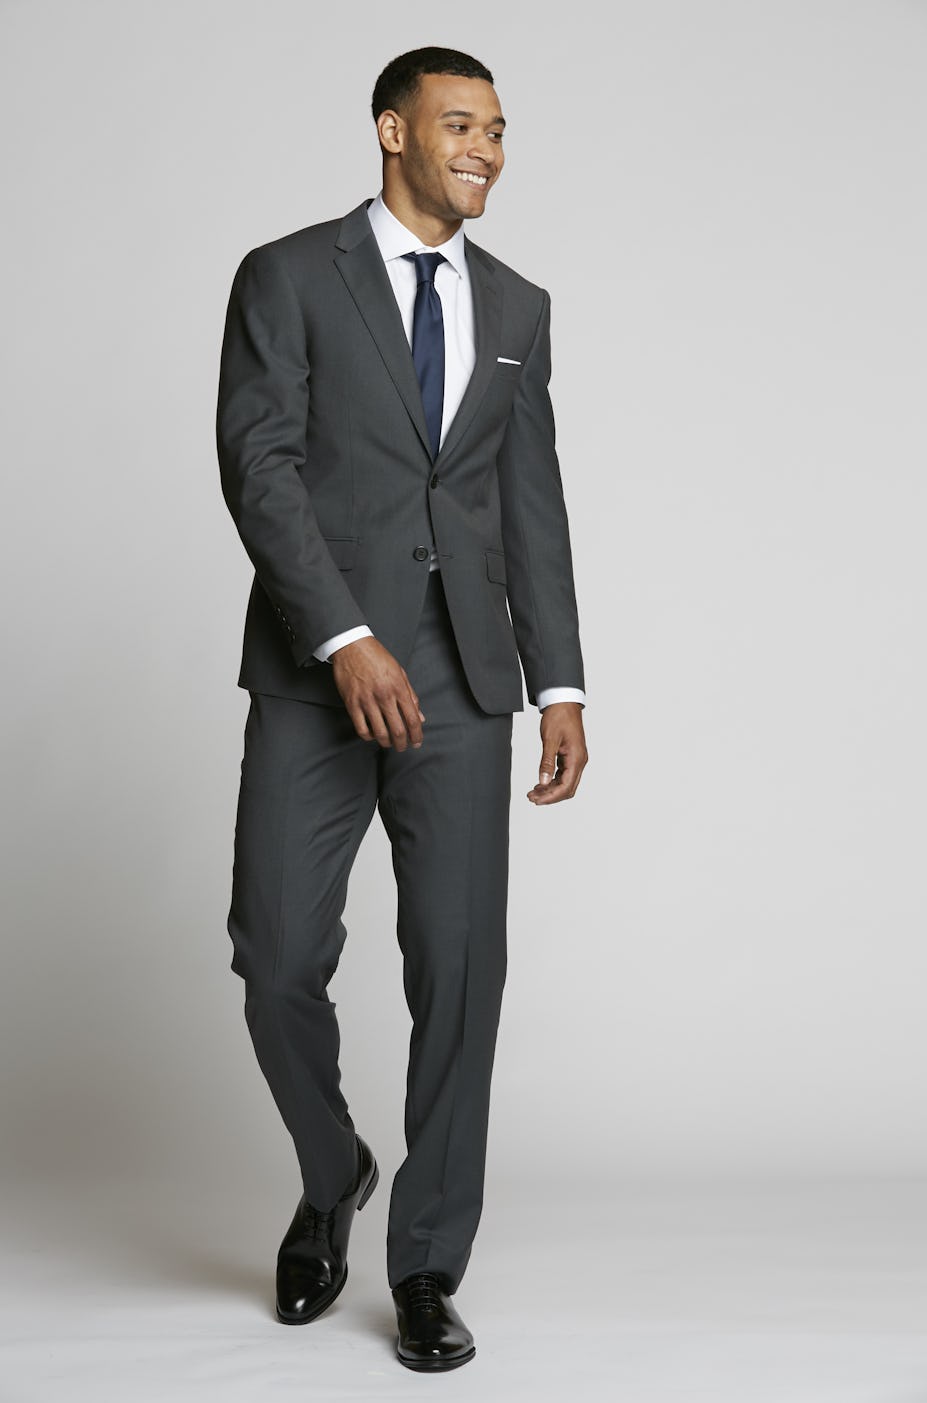 DOs and DONTs for Men’s Wedding Guest Attire | SuitShop